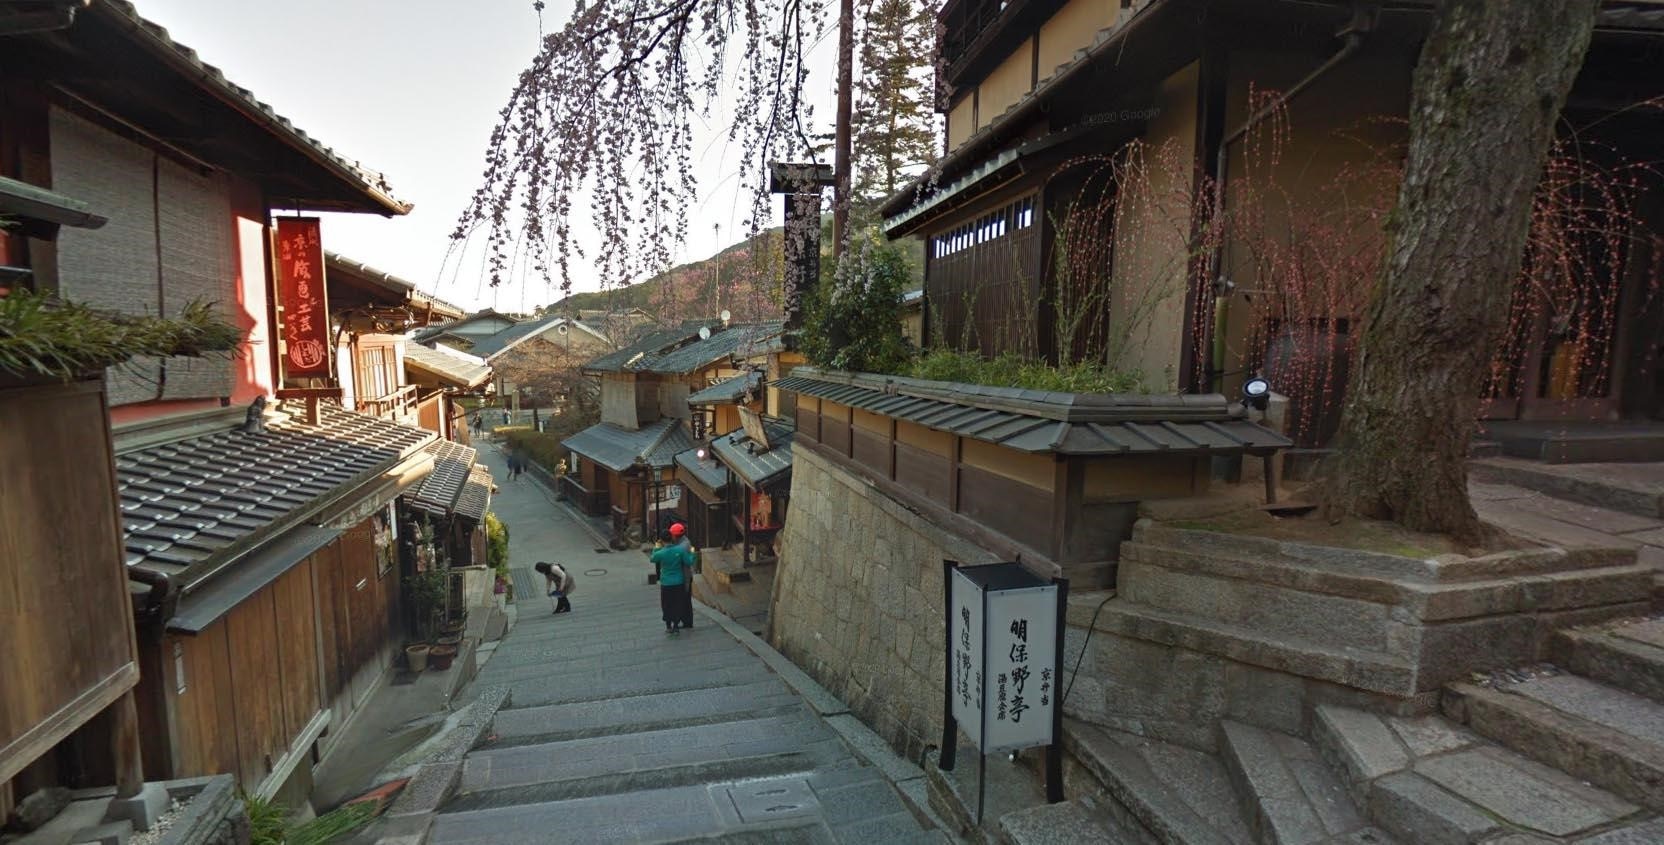 Photograph of a traditional Japanese street.